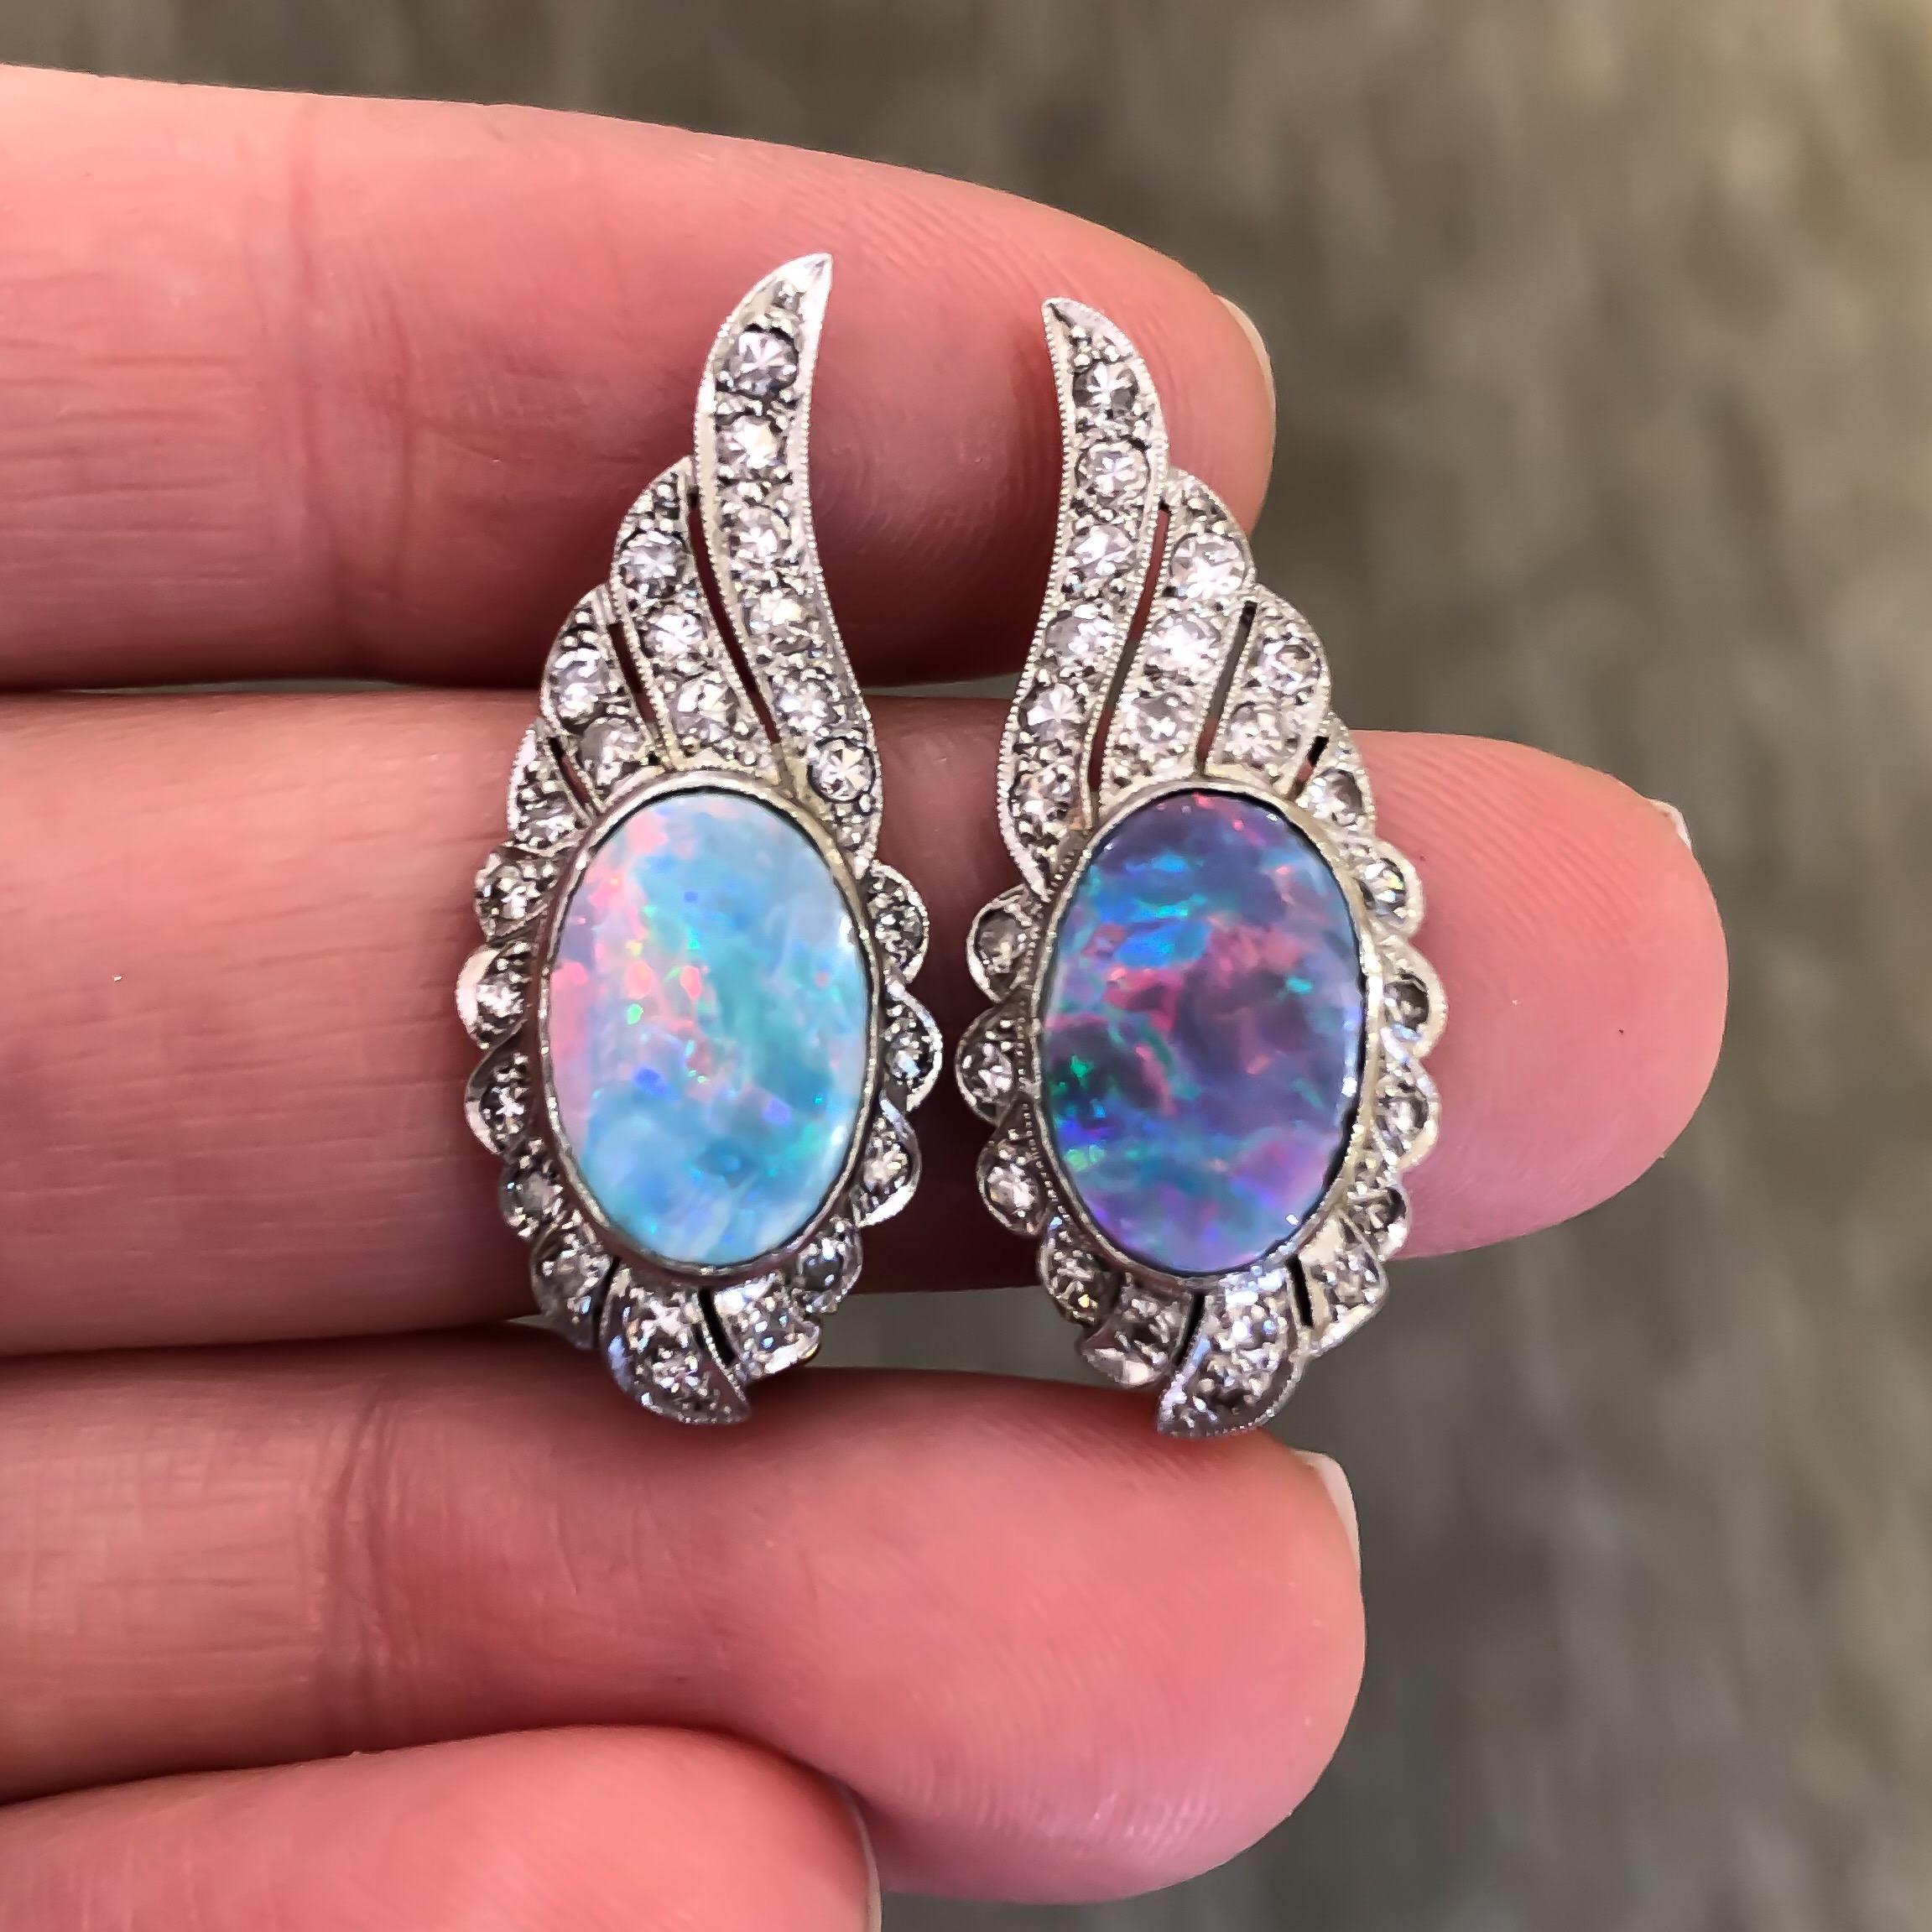 These stunning vintage doublet Australian opals are bright bluish green with flashes of red and yellow. They are securely bezel set into flattering platinum wing shaped clip earrings with bead set single cut diamonds with delicate milgrain design.